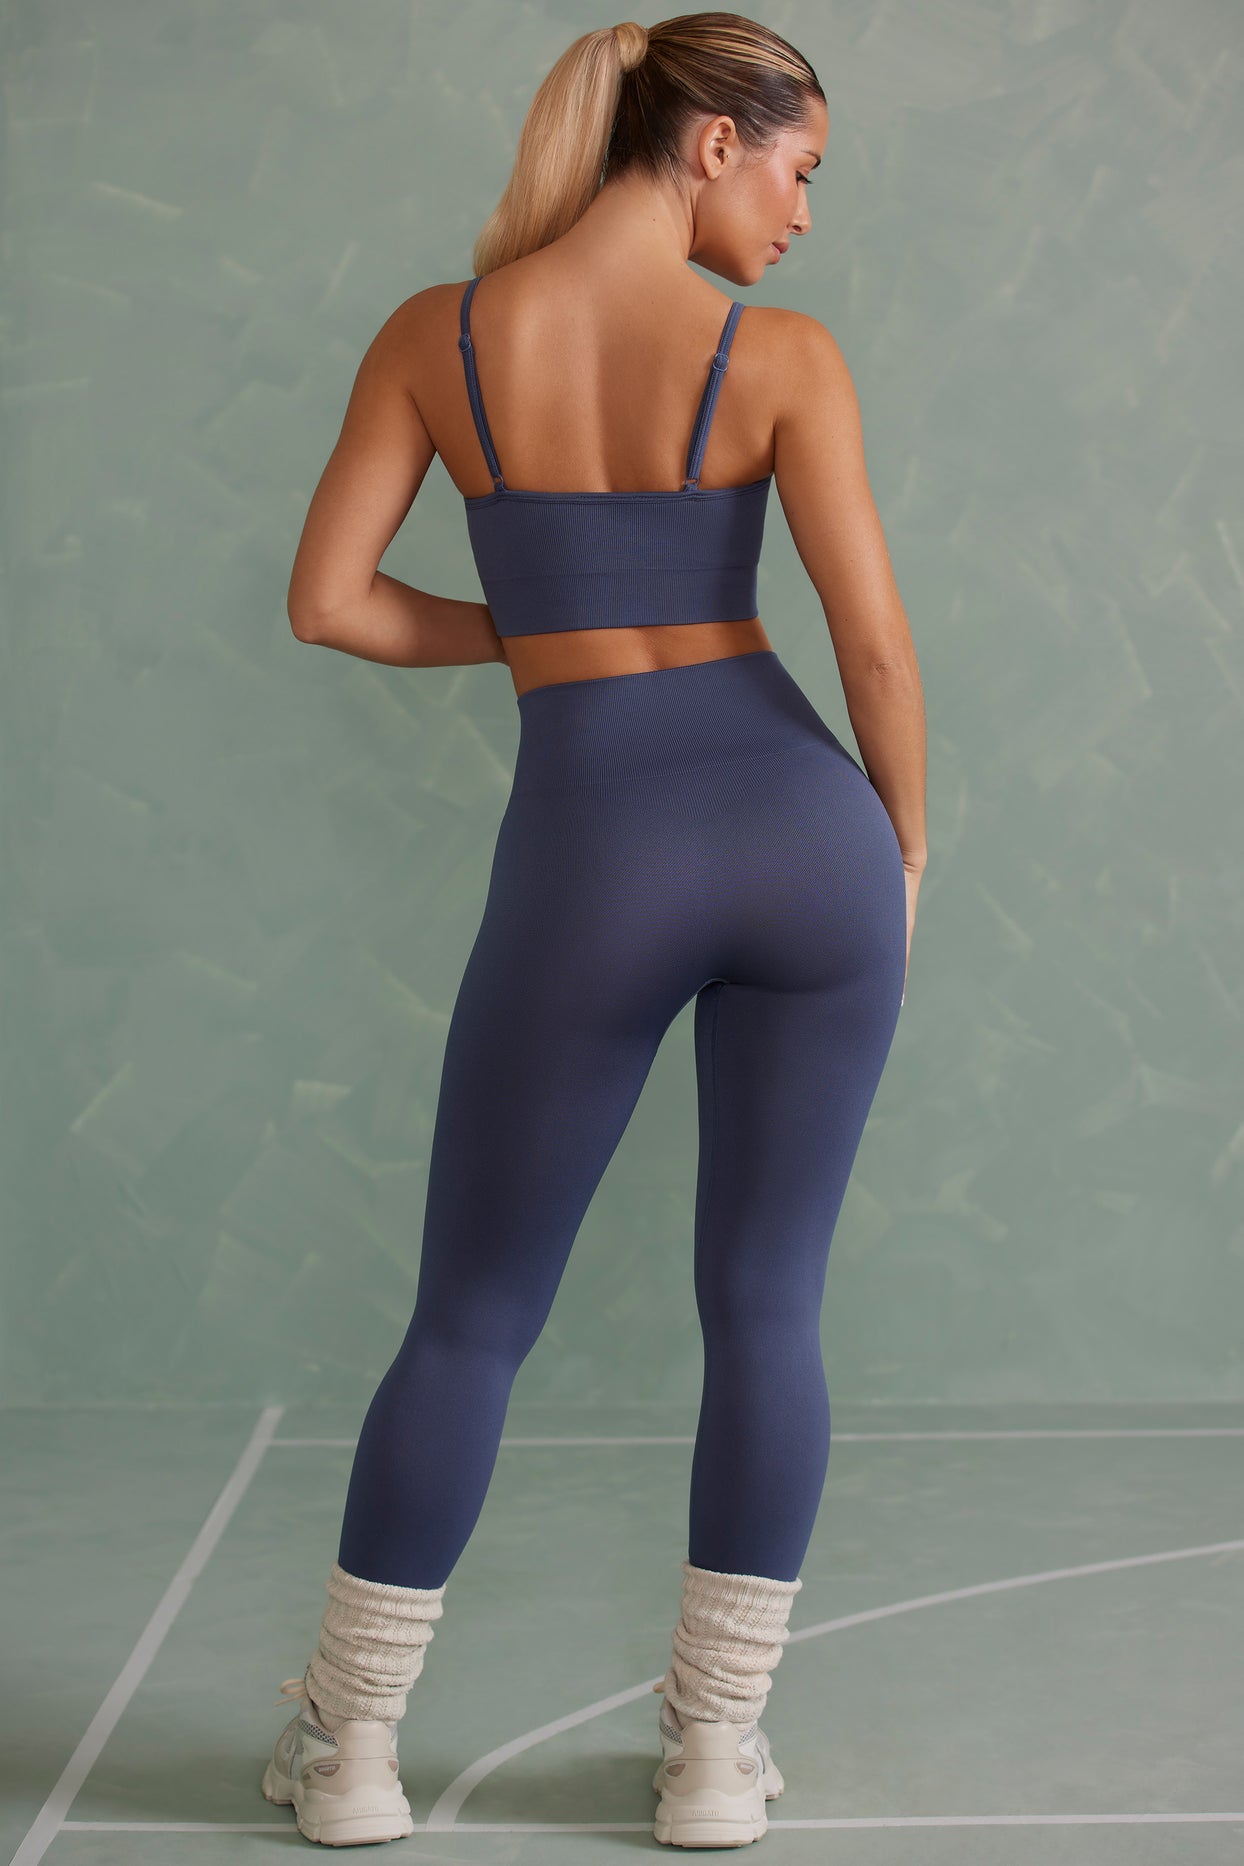 Navy Blue and Orange Striped Workout Leggings for Women Soft Leggings -   Canada